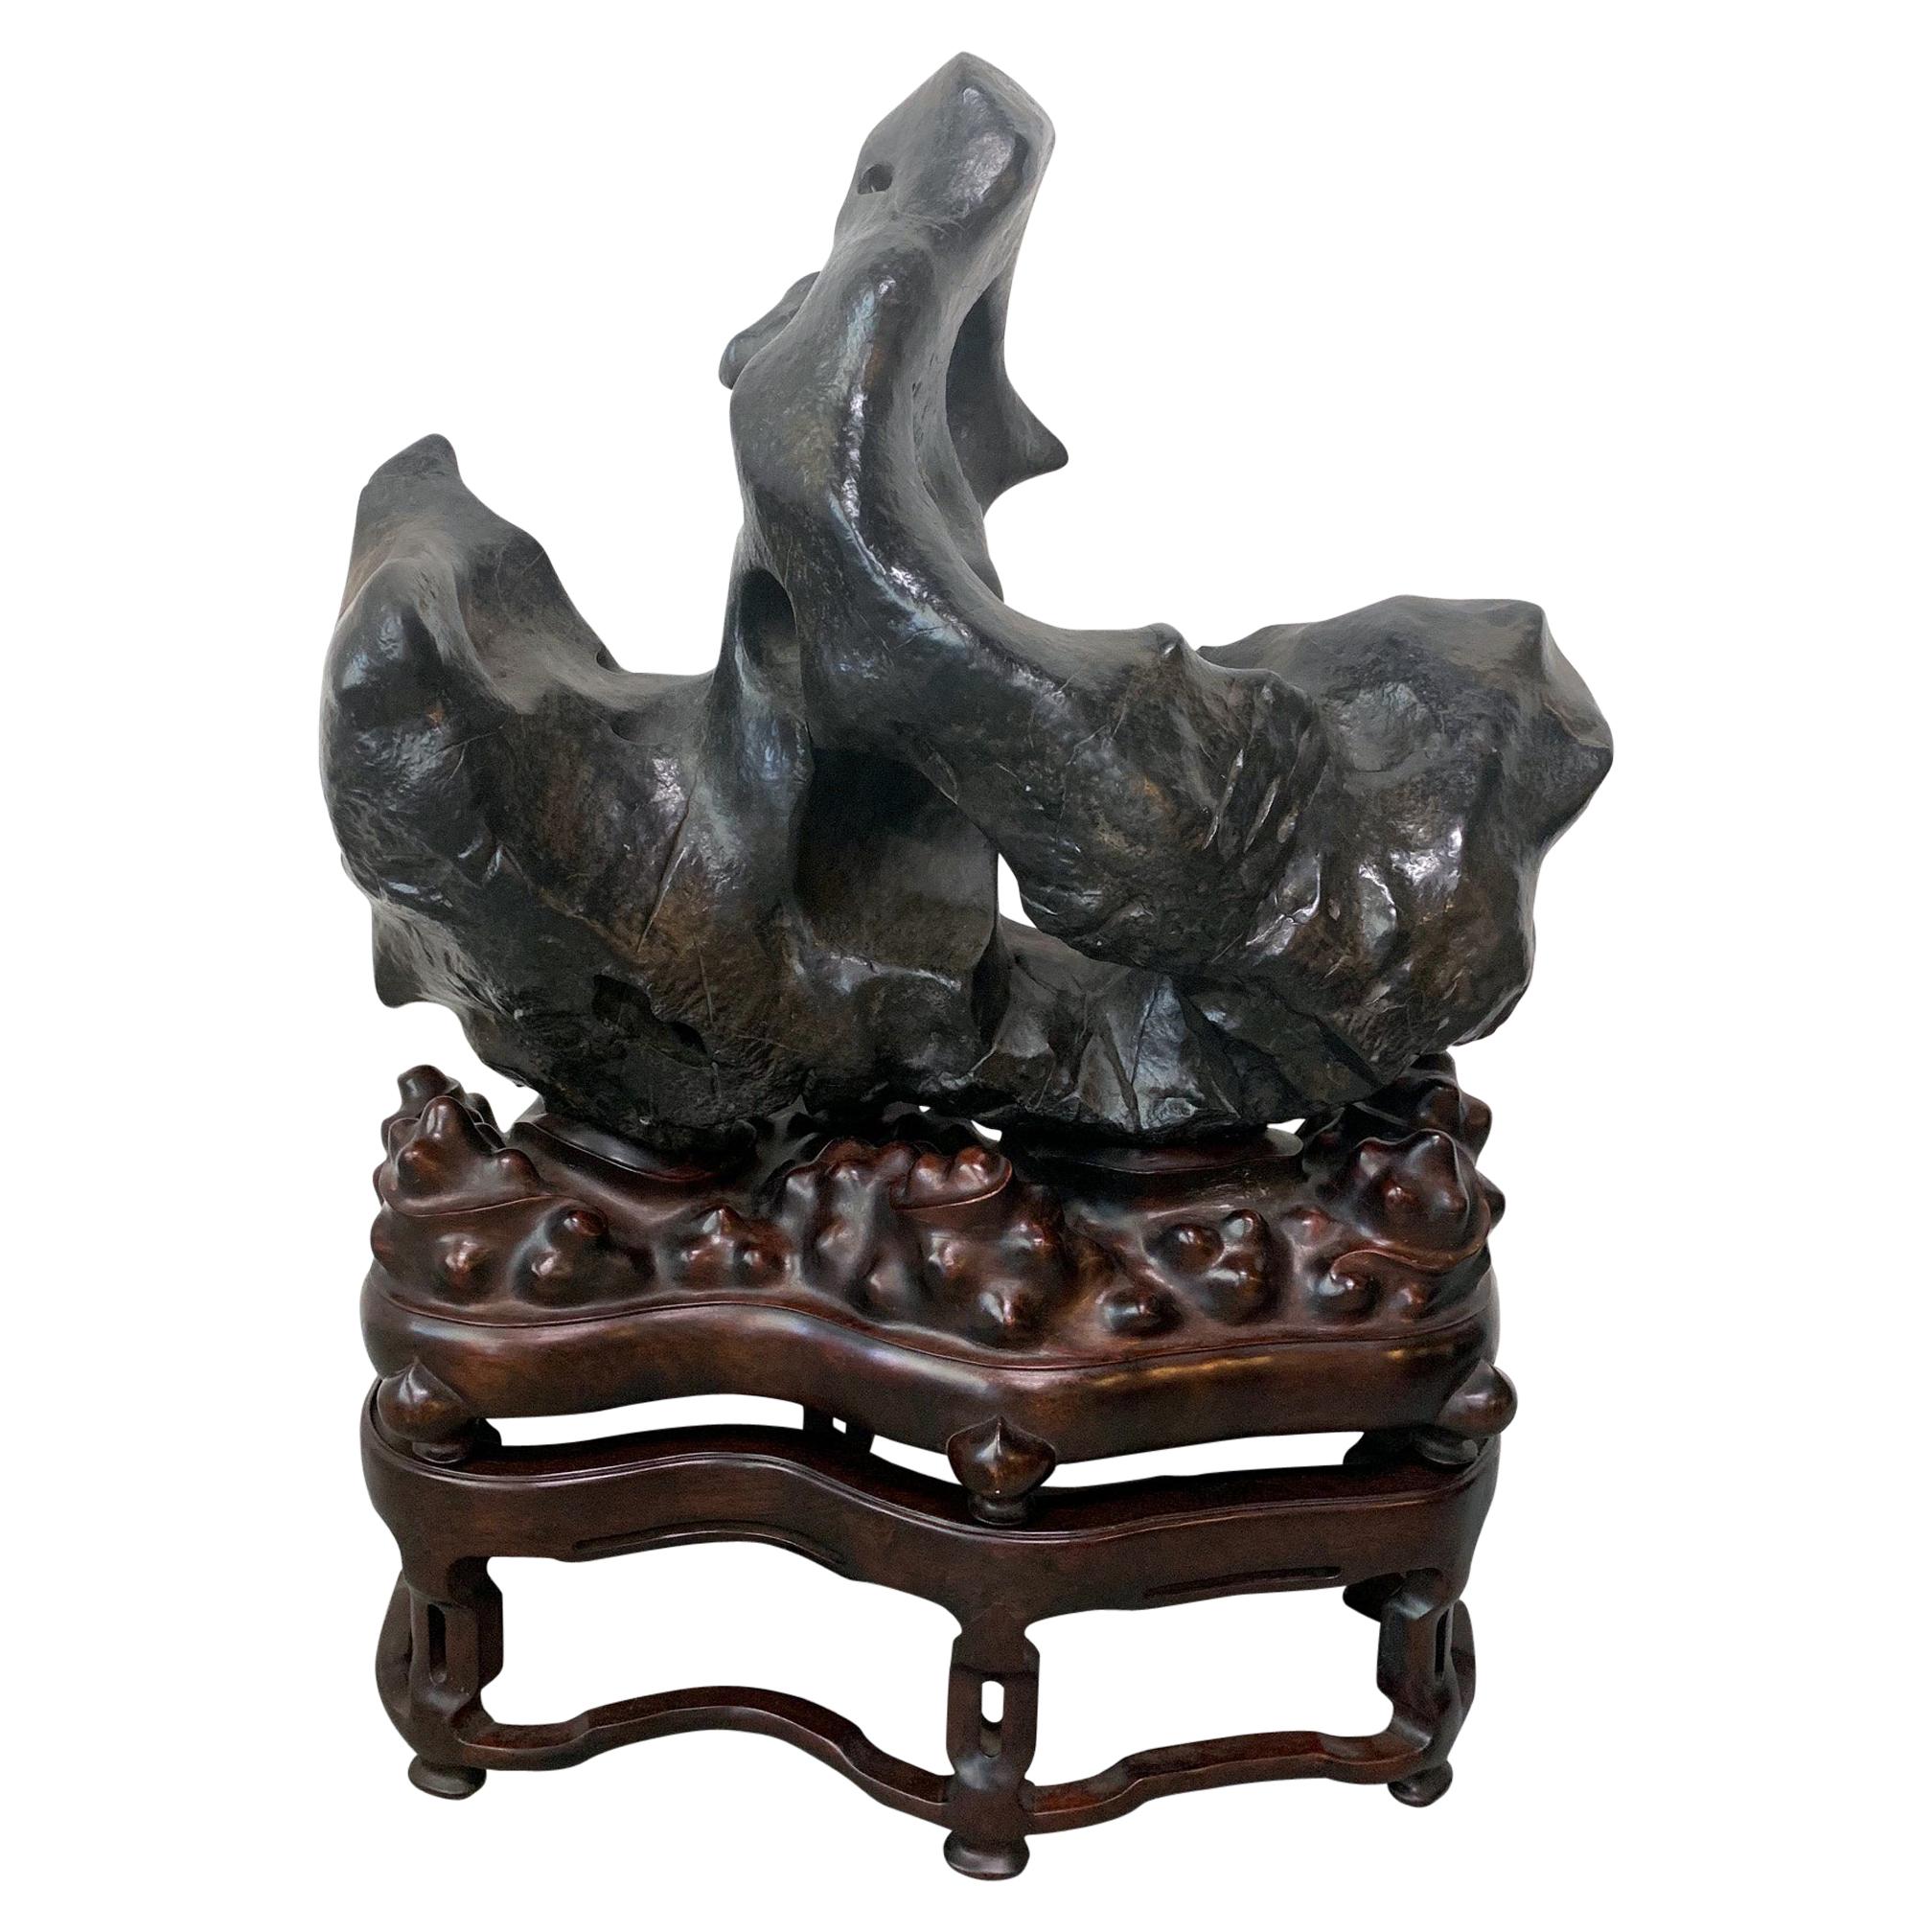 Large Spectacular Chinese Lingbi Scholar Stone on Stand